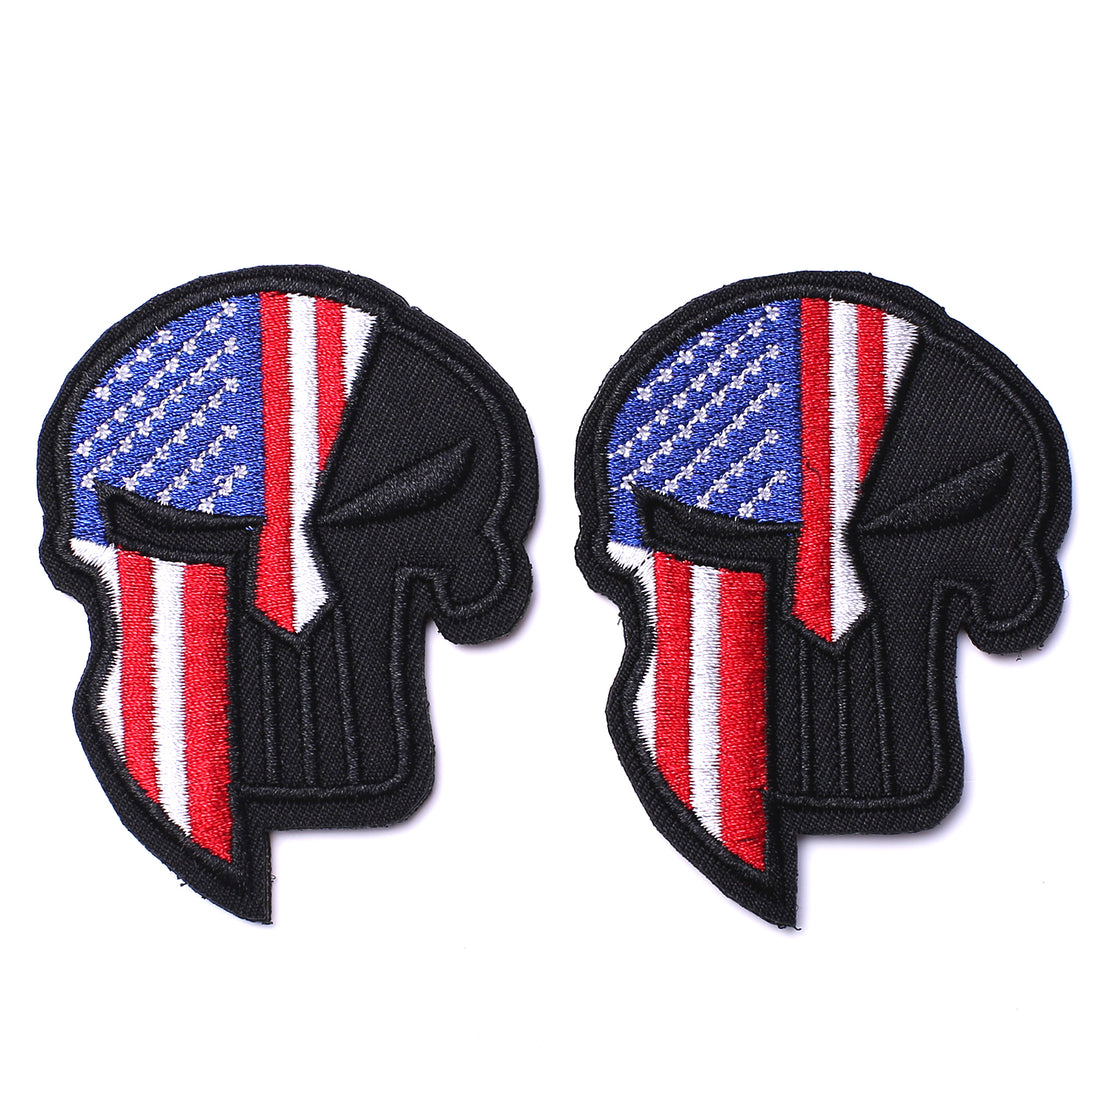 Tactical USA US American Spartan Dead Skull Helmet Patch Hook and Loop Embroidered Military US Dead Skull Flag Sticker Patch for Jackets Jeans Jersey Pants -3.54x2.36"